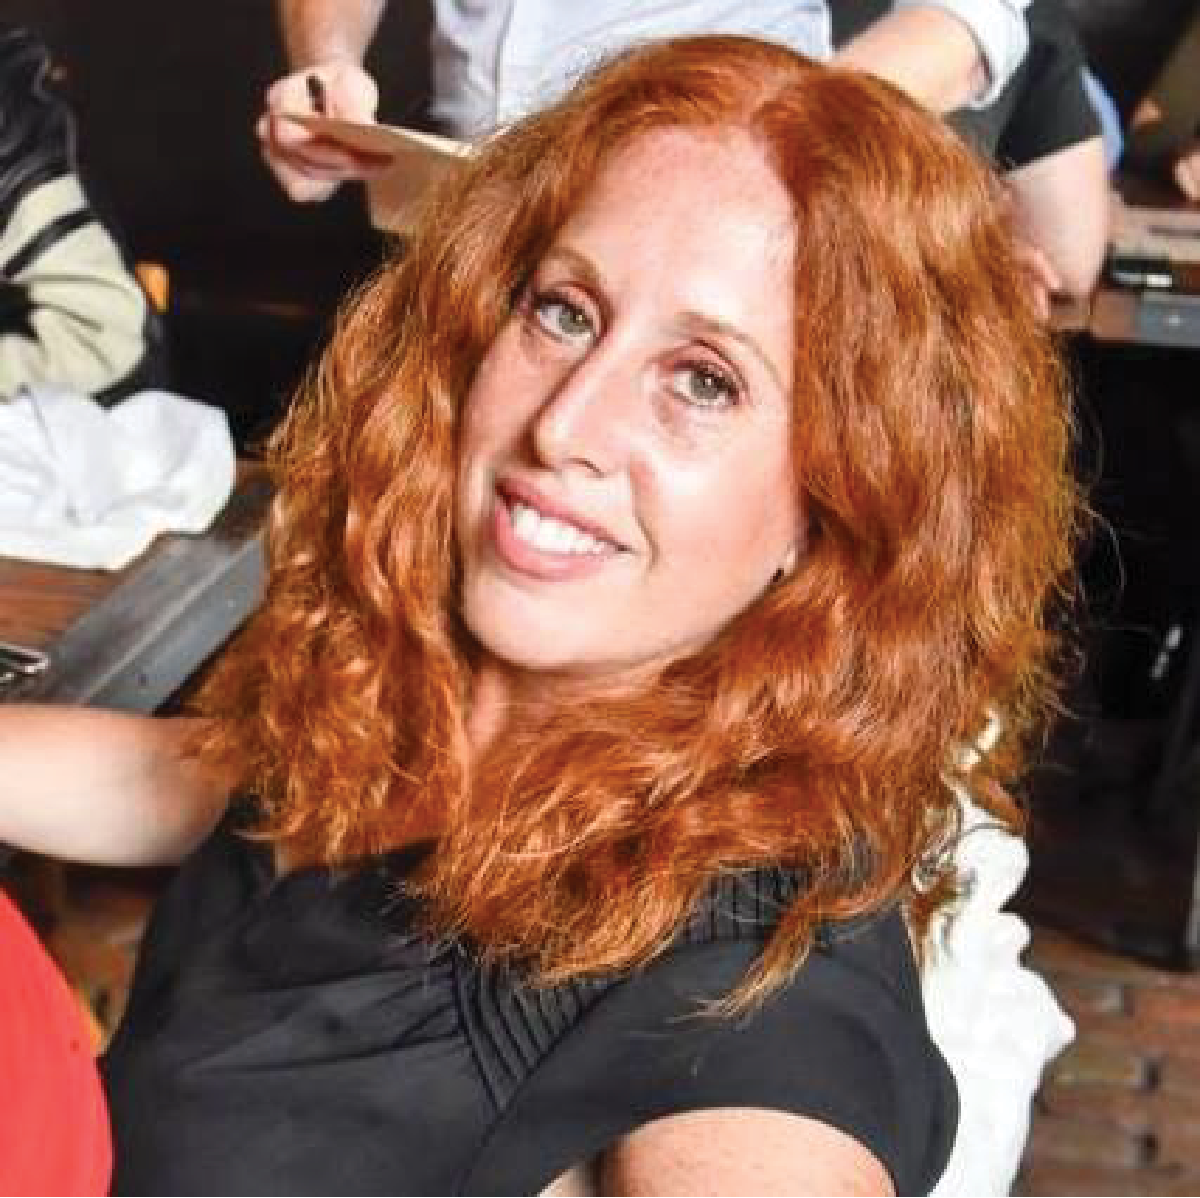 A woman with red hair sitting in front of other people.